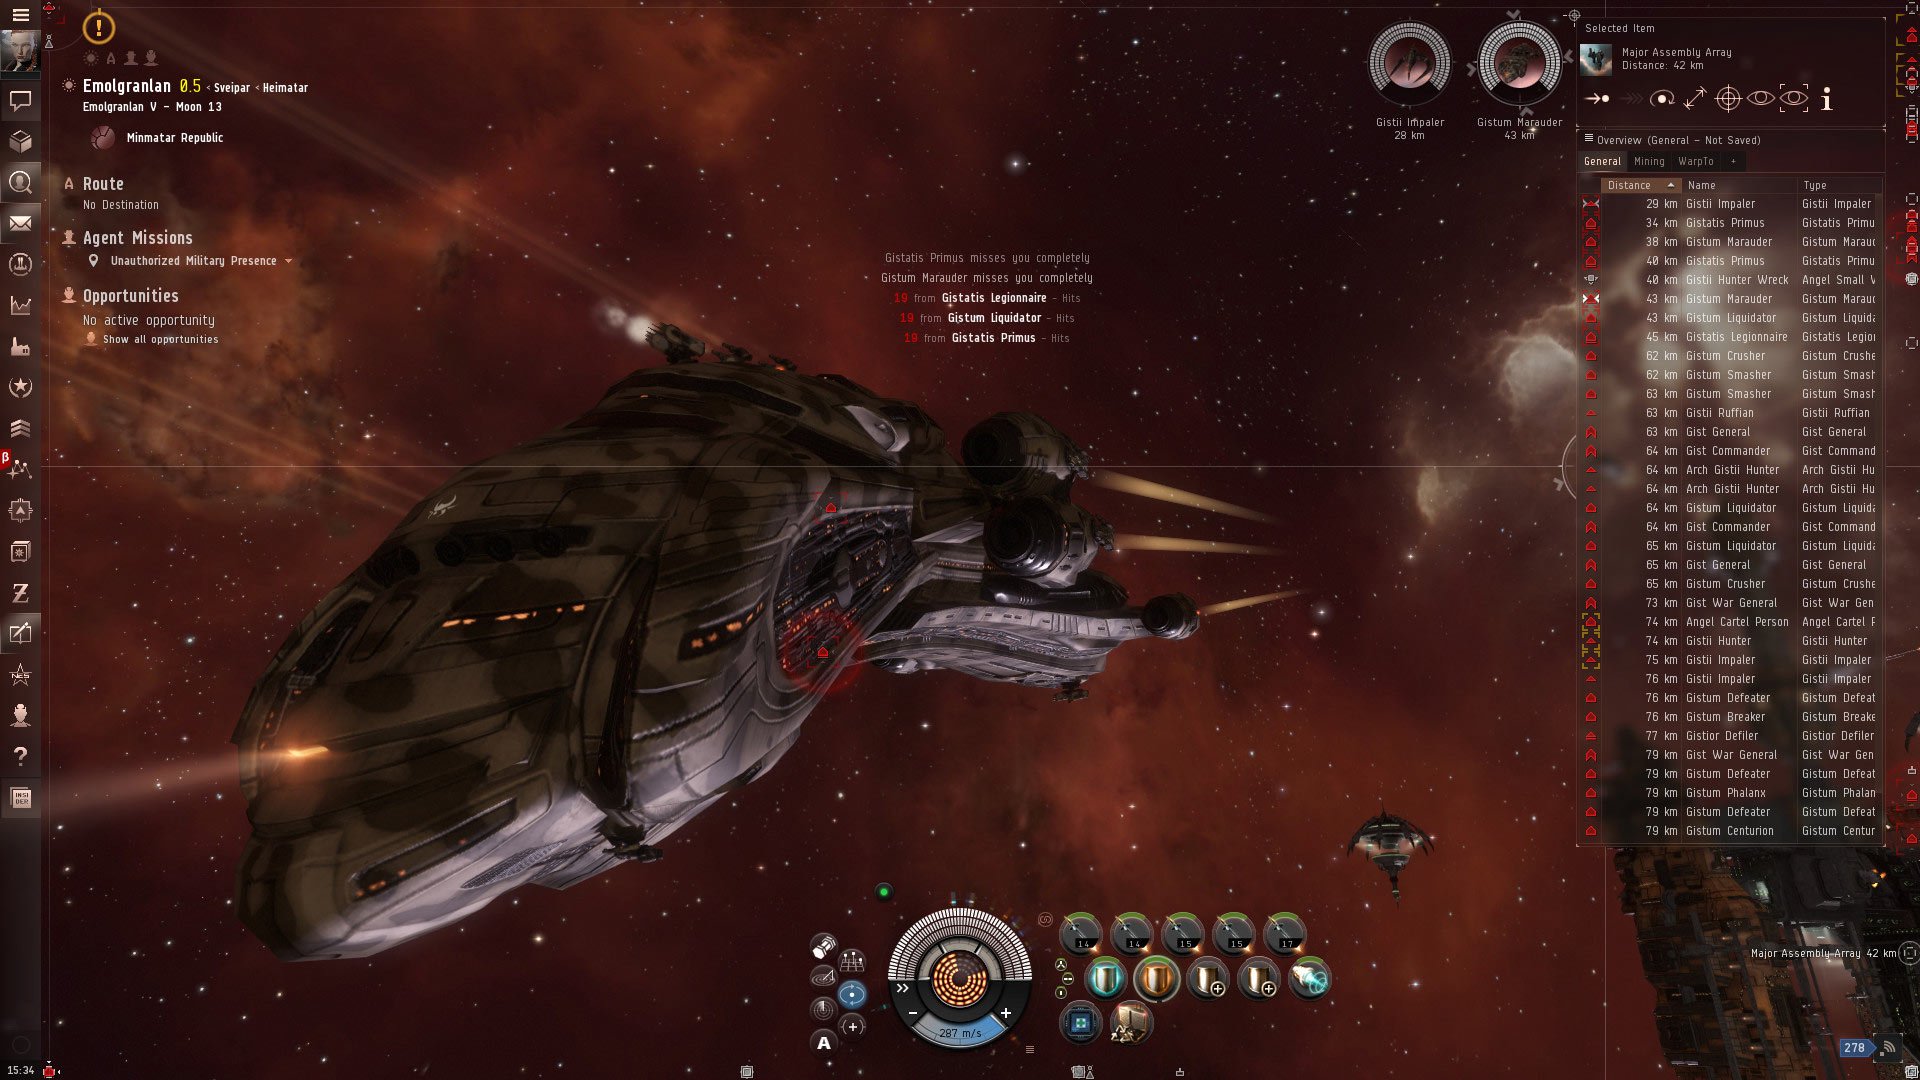 EVE Online spin-off Project Nova has been cancelled